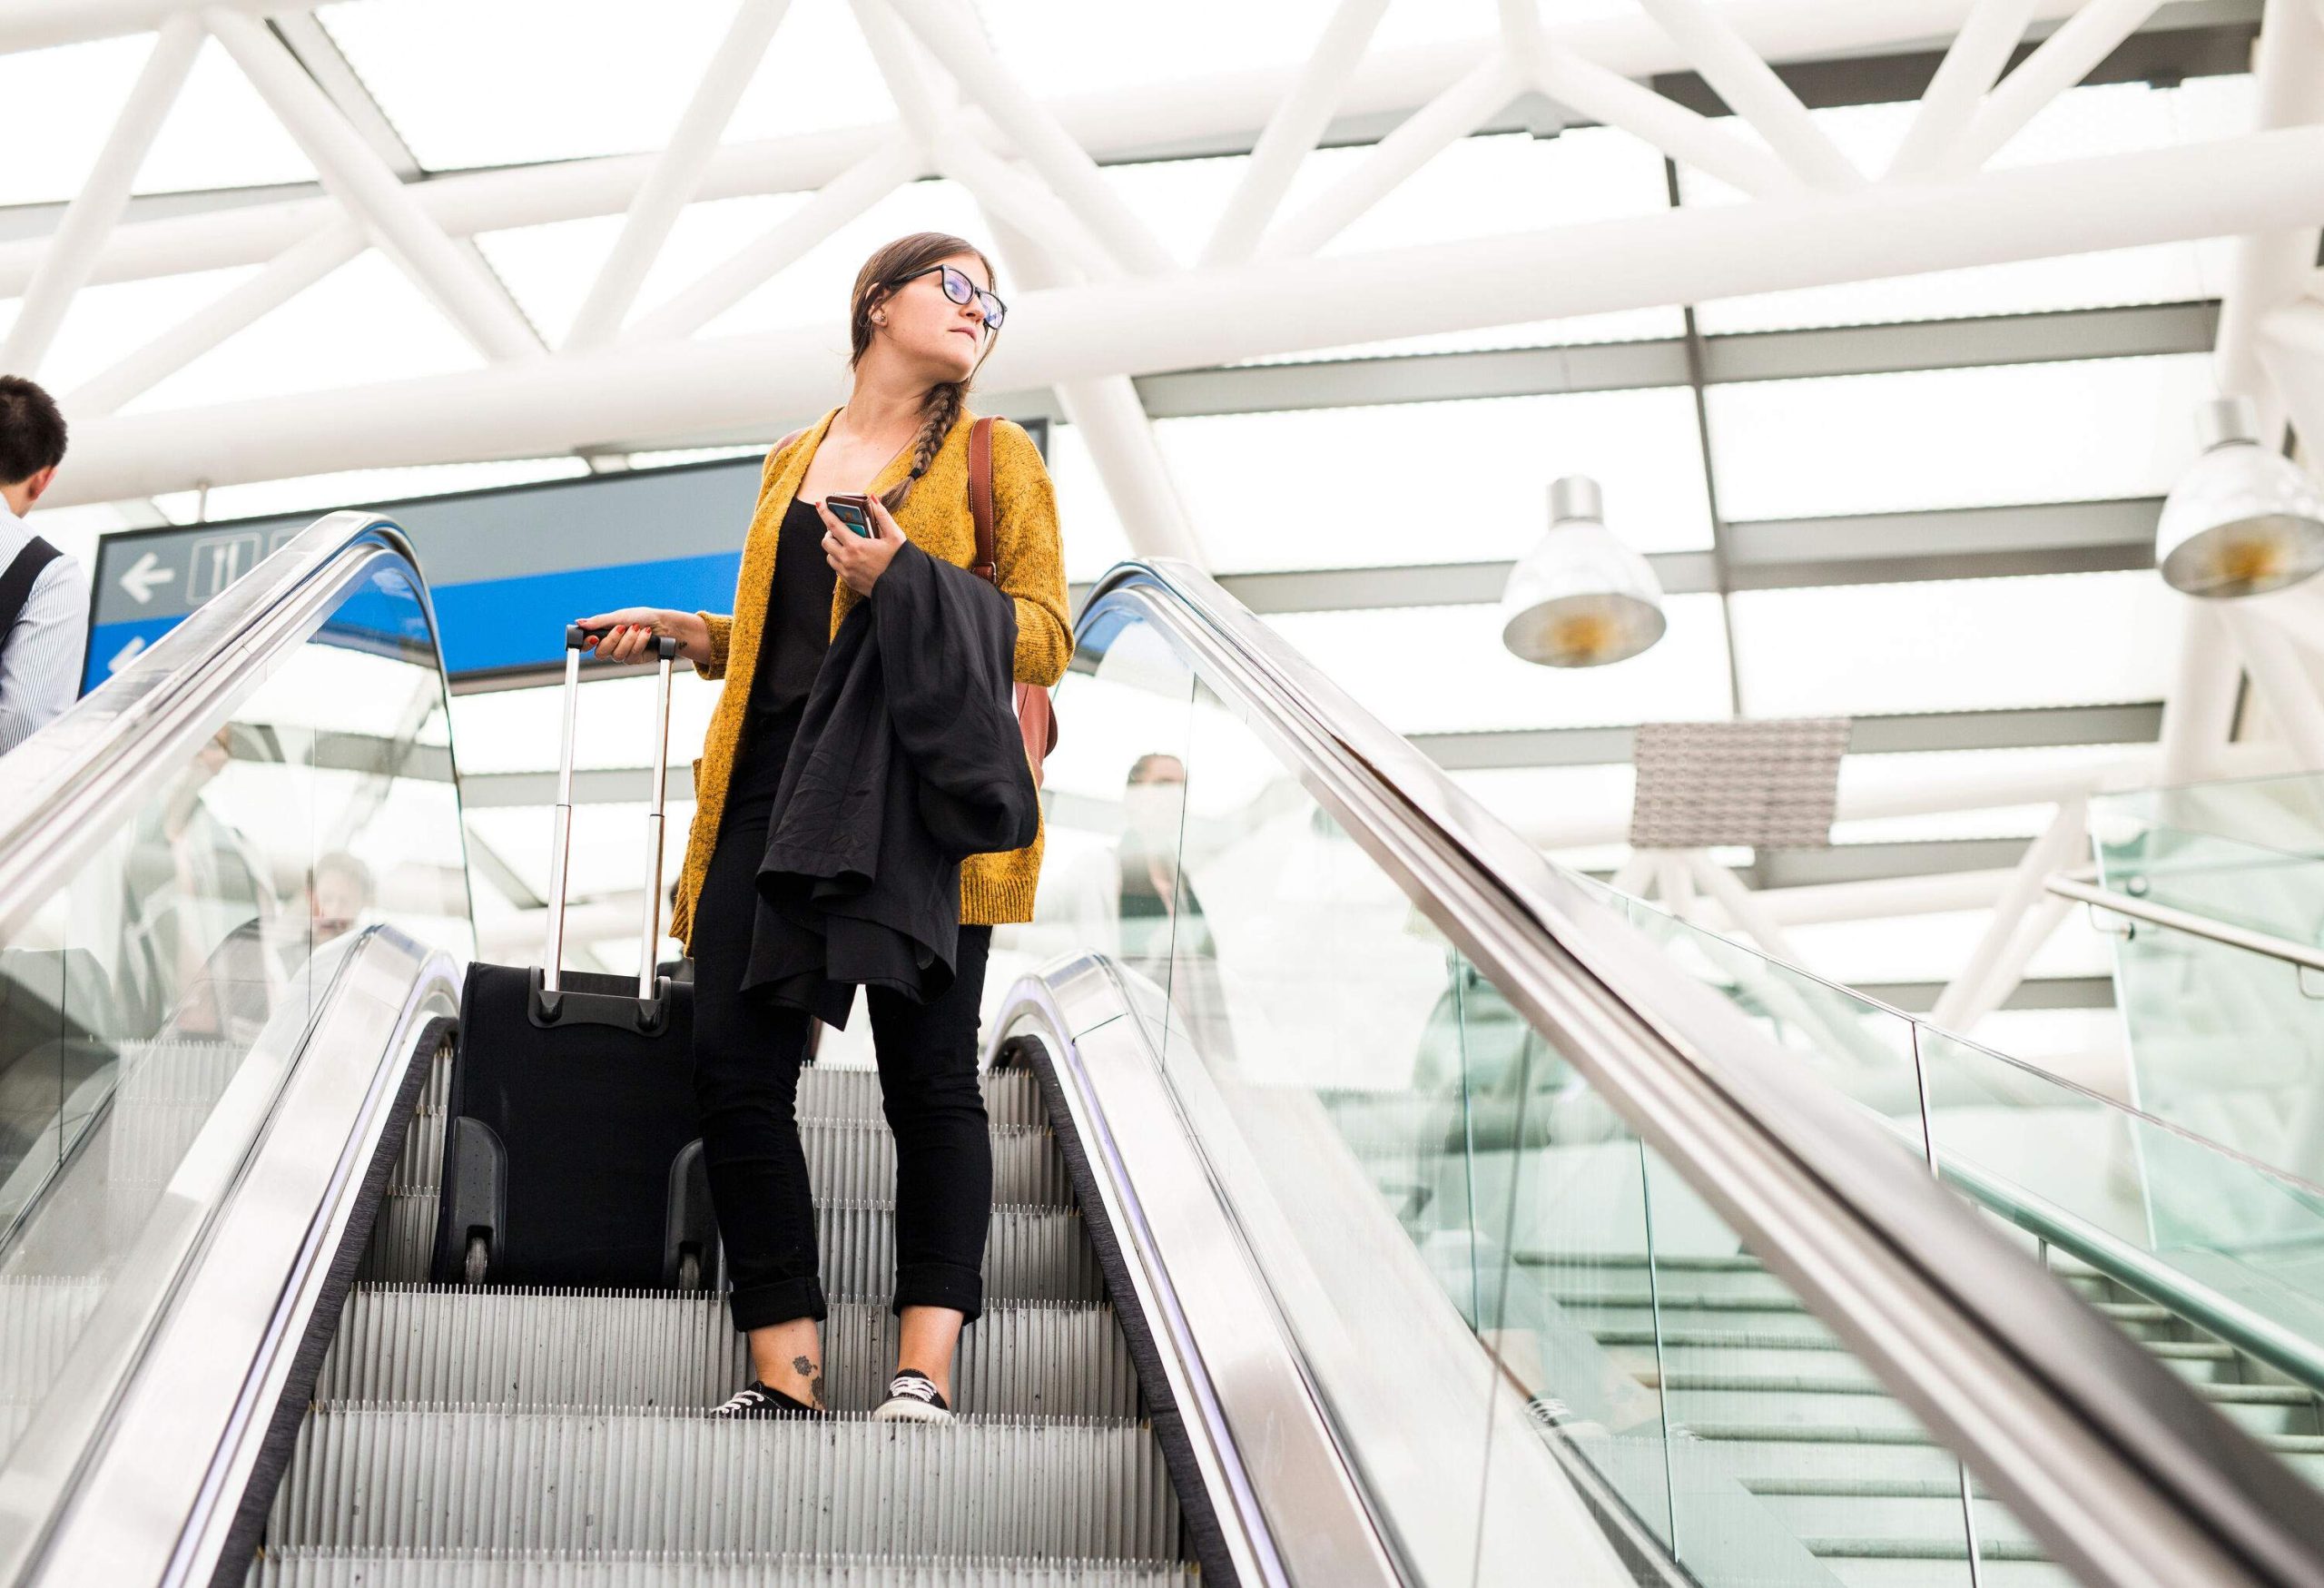 A woman with a suitcase standing on an escalator, distractedly gazing someplace.